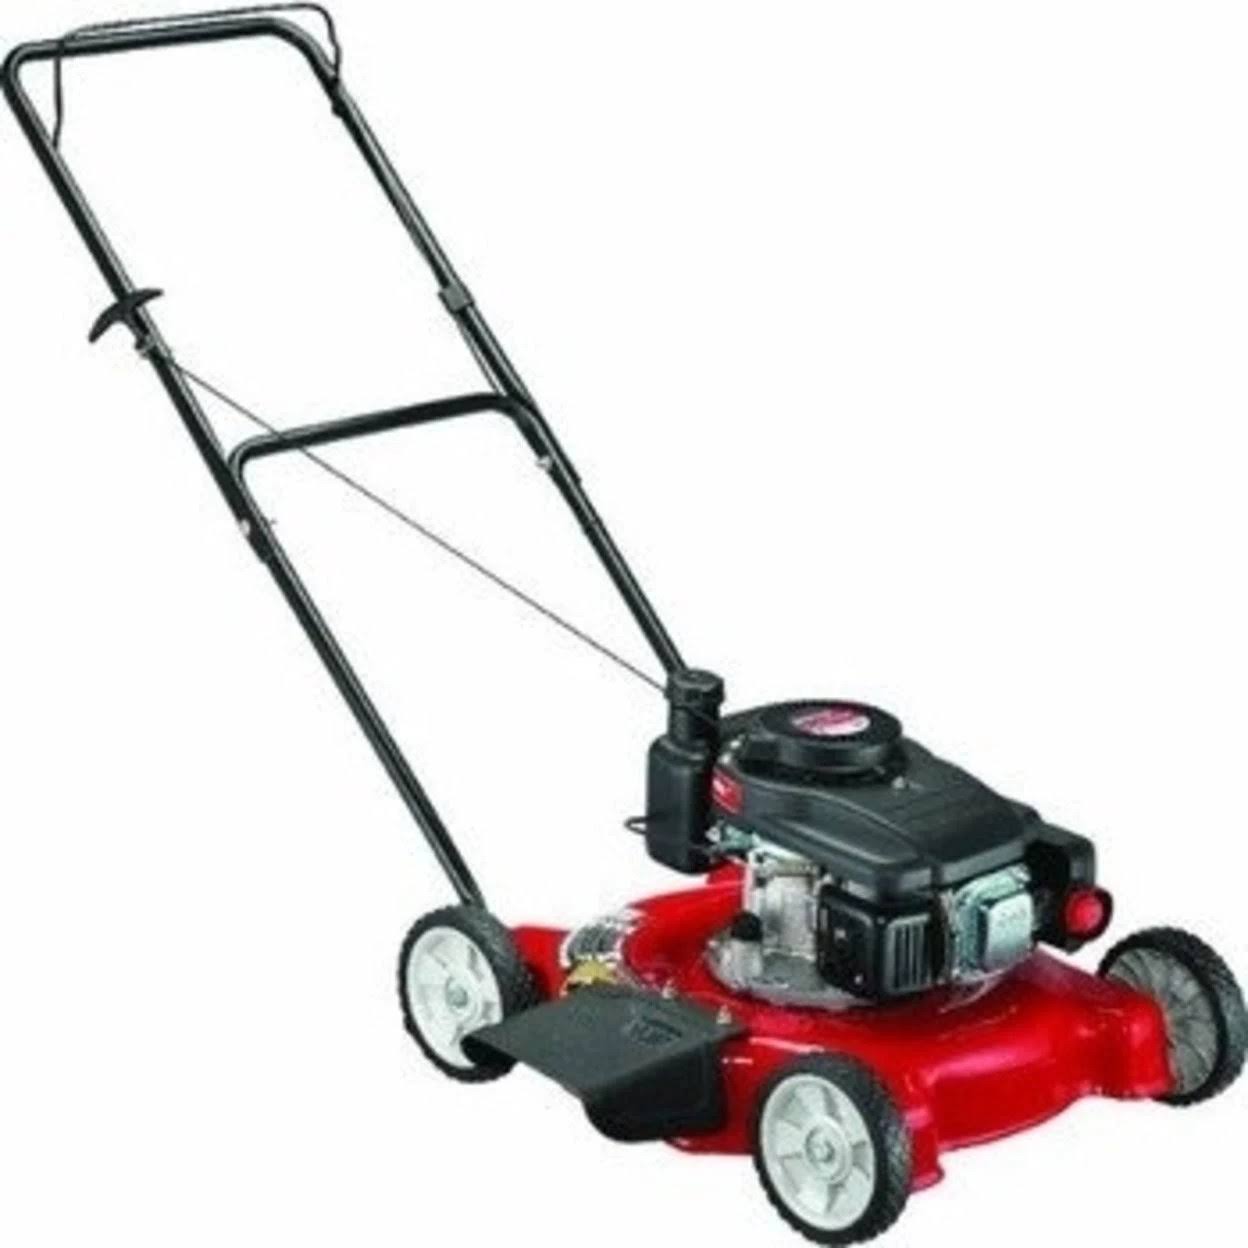 Yard Machines Gas Push Lawn Mower with Side Discharge - 20"